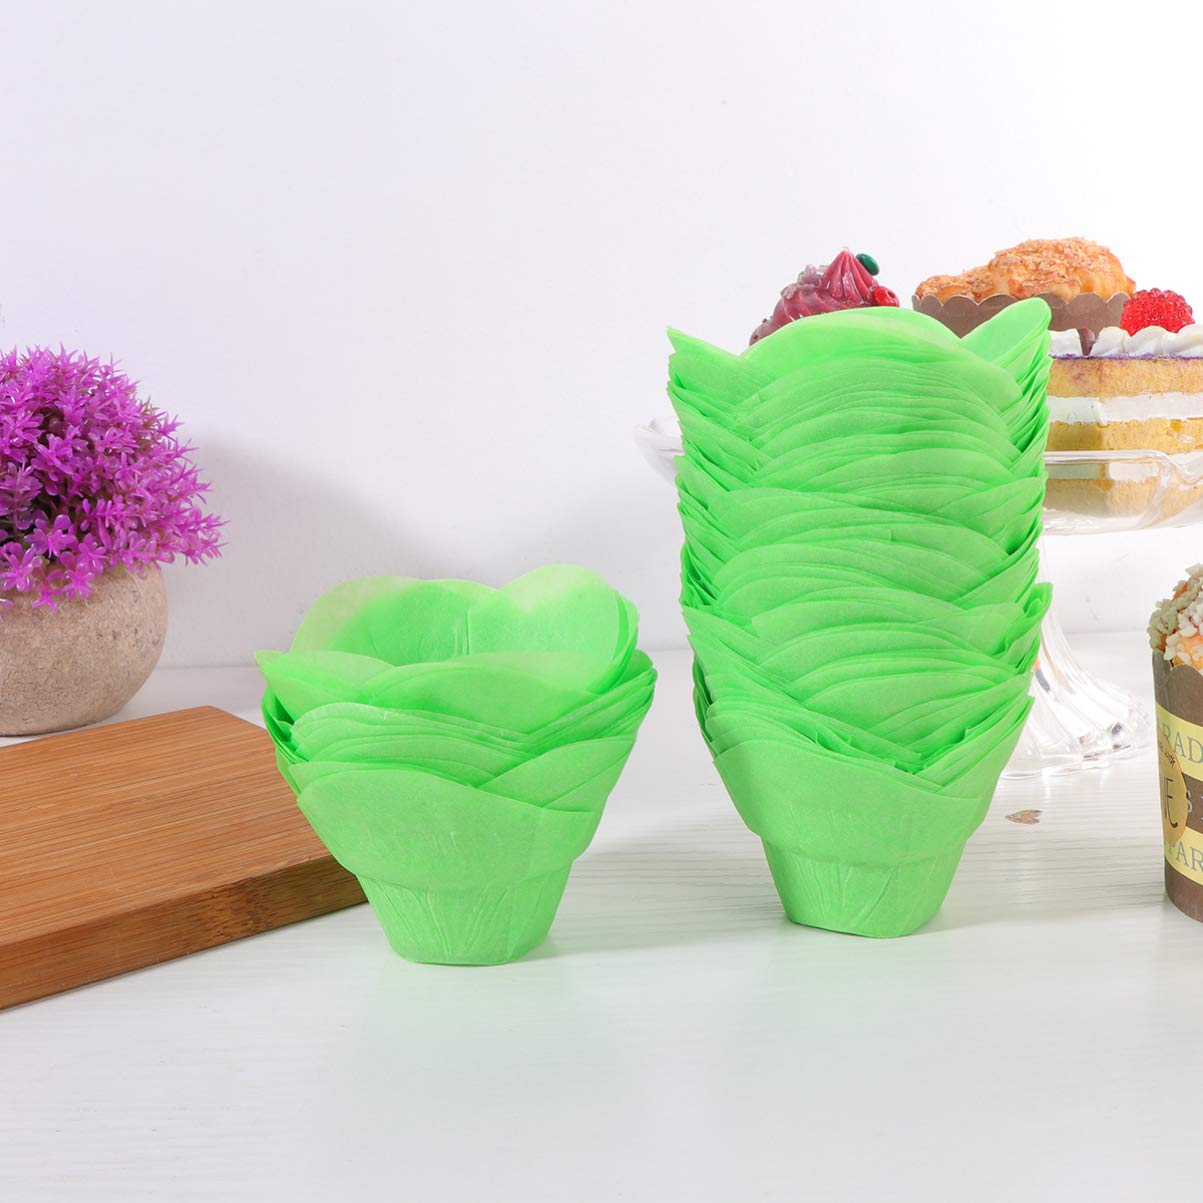 Luxshiny Muffin Liners 100pcs Truffle Wrappers Paper Chocolate Candy Cups Flower Shaped Truffle Cups Baking Liners for Parties Cupcakes Muffins Mini Snacks Green Cupcake Liners